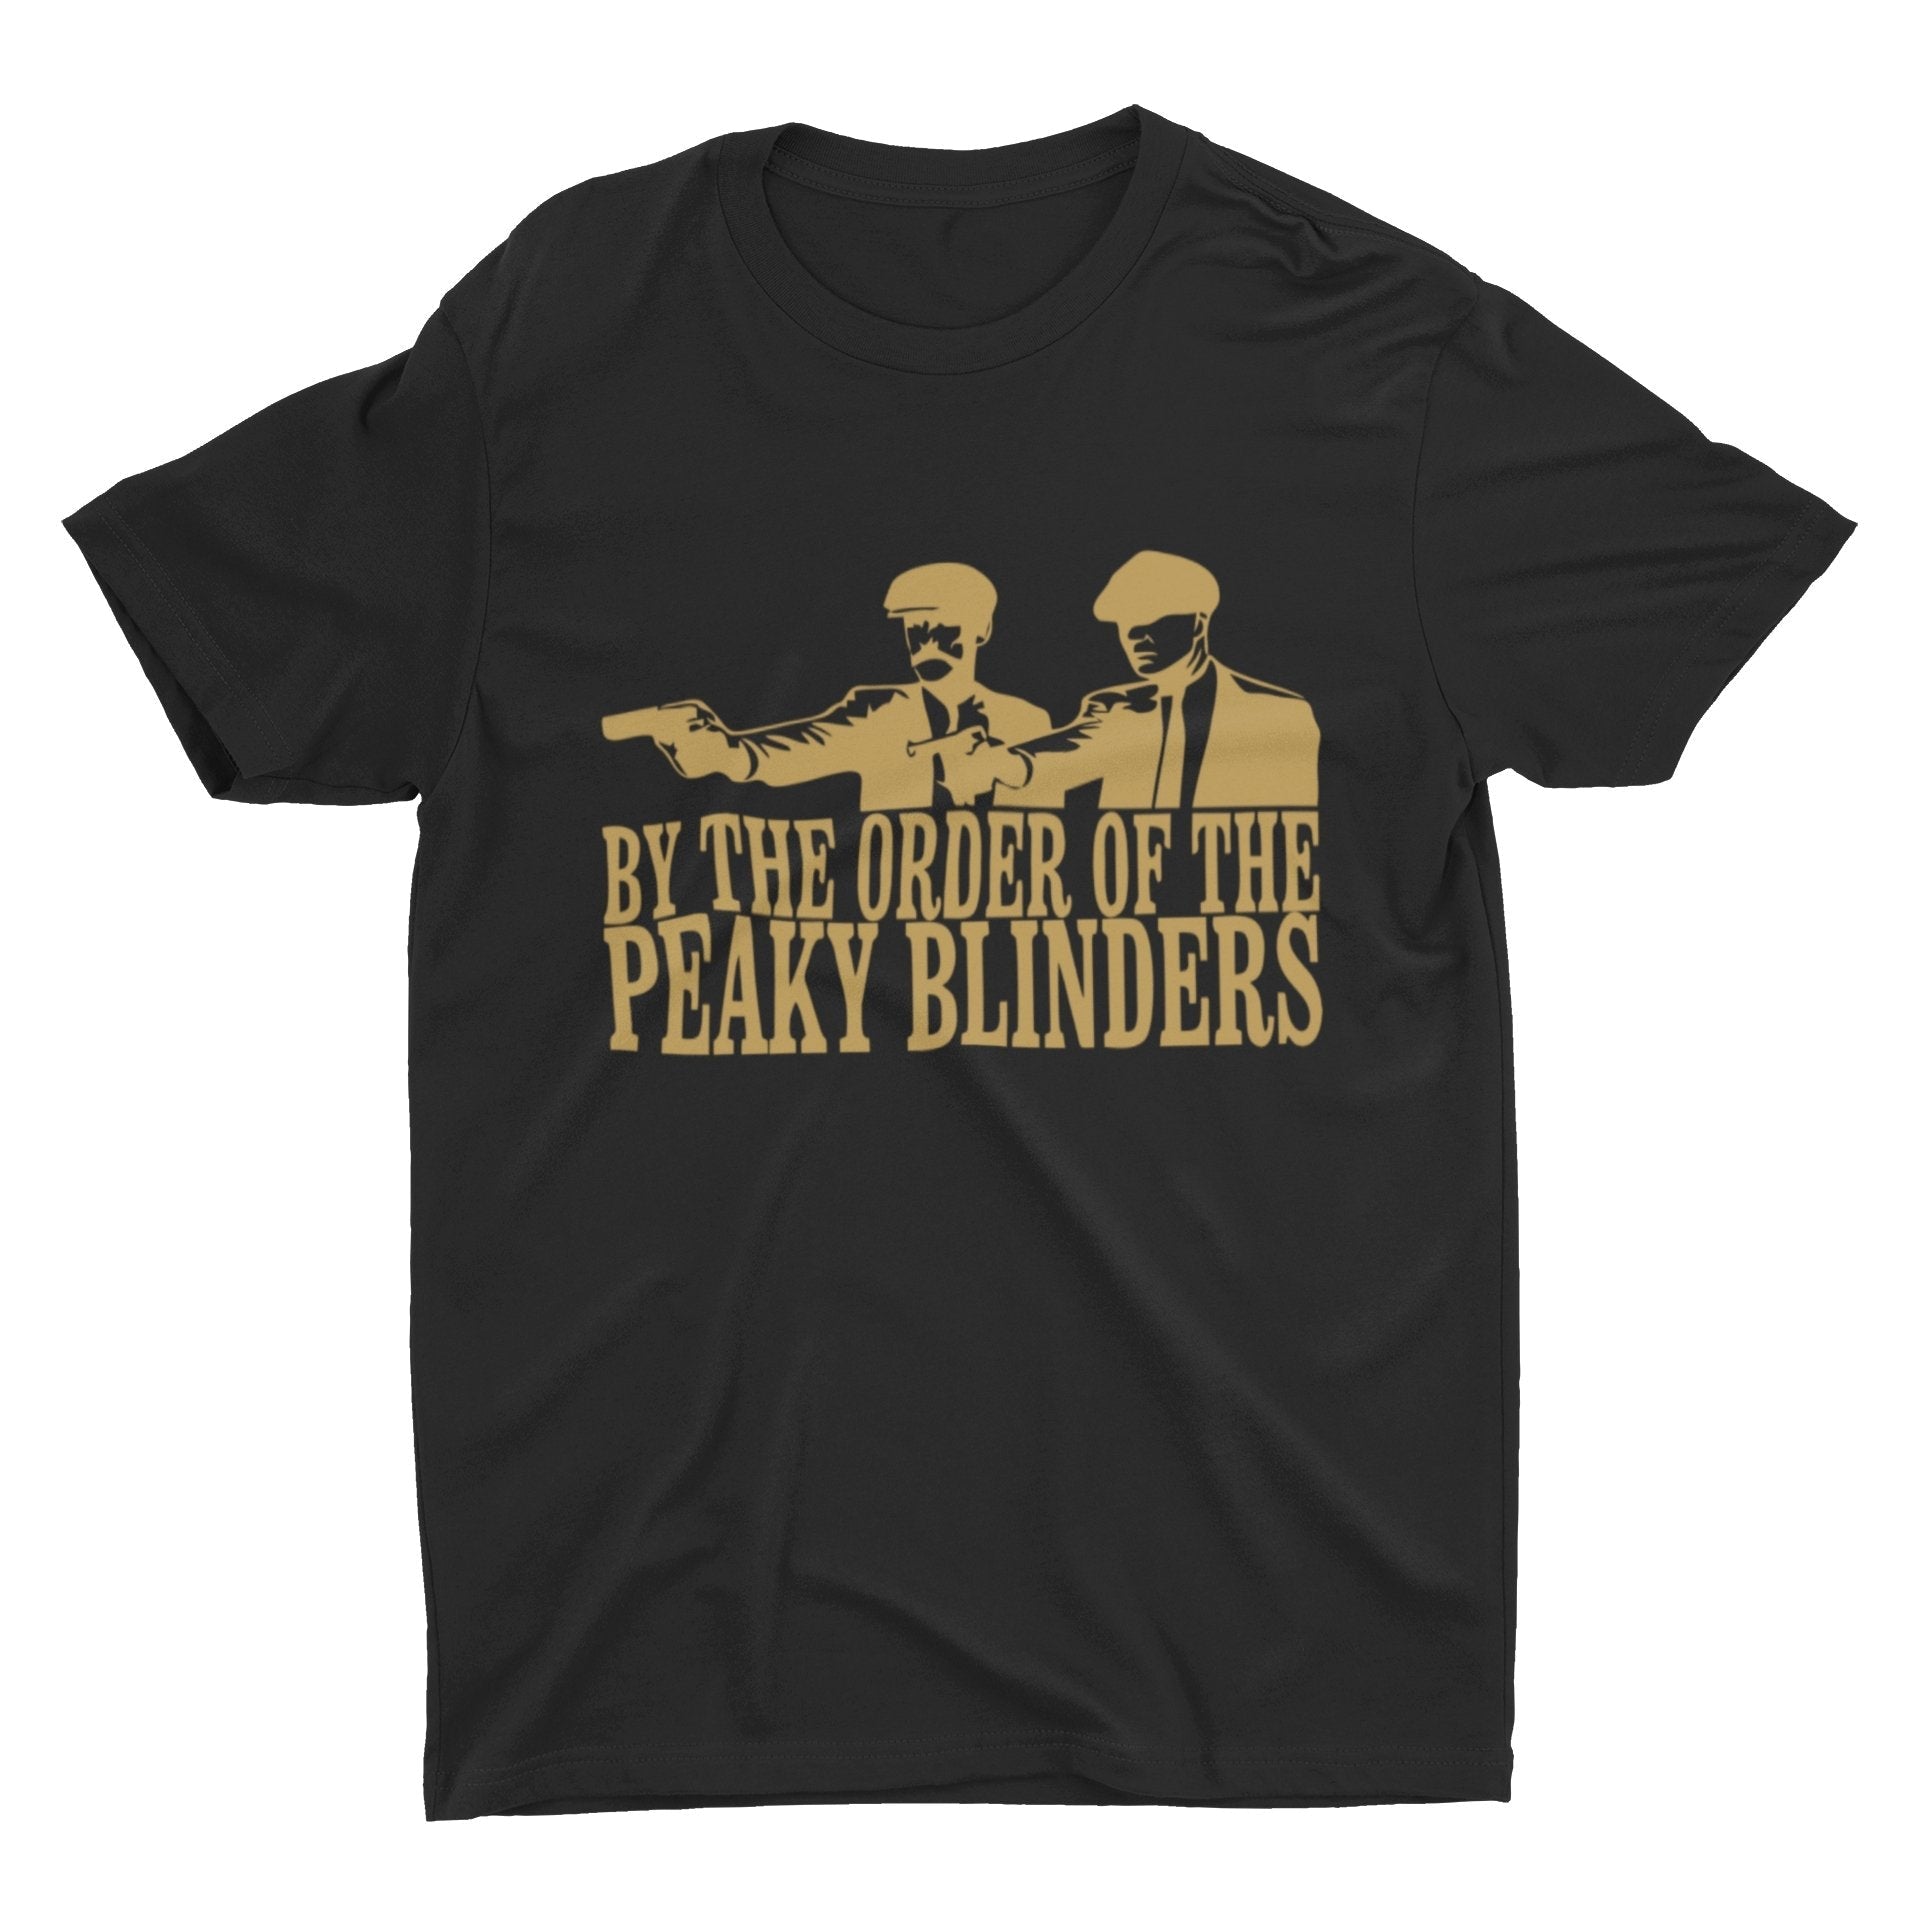 thelegalgang,By Order of the Peaky Blinders Quote T-shirt,.